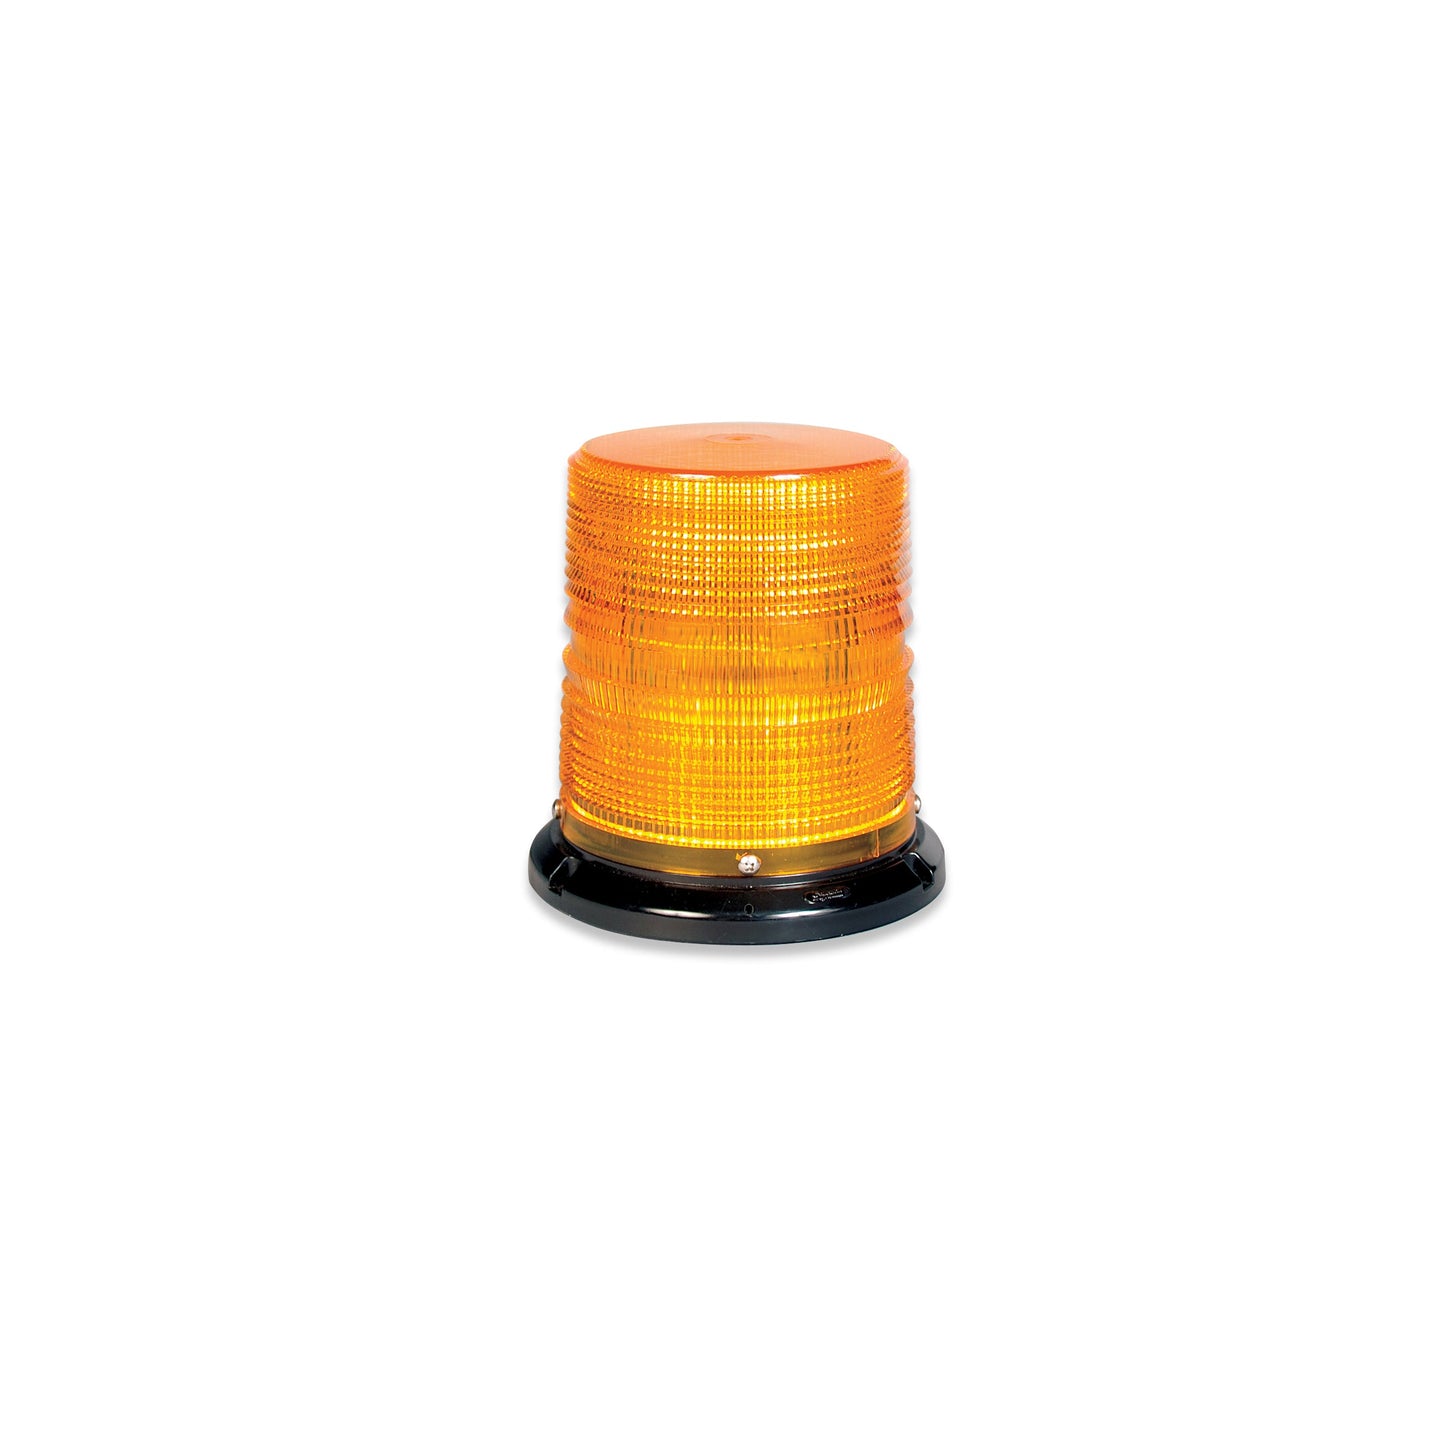 Soundoff Signal ELB45BMH+FC 4500 Series Led Beacon, 10-30V, Sae J845 Class 1 - Magnetic Mount, 6" Clear Dome & Amber/White Leds